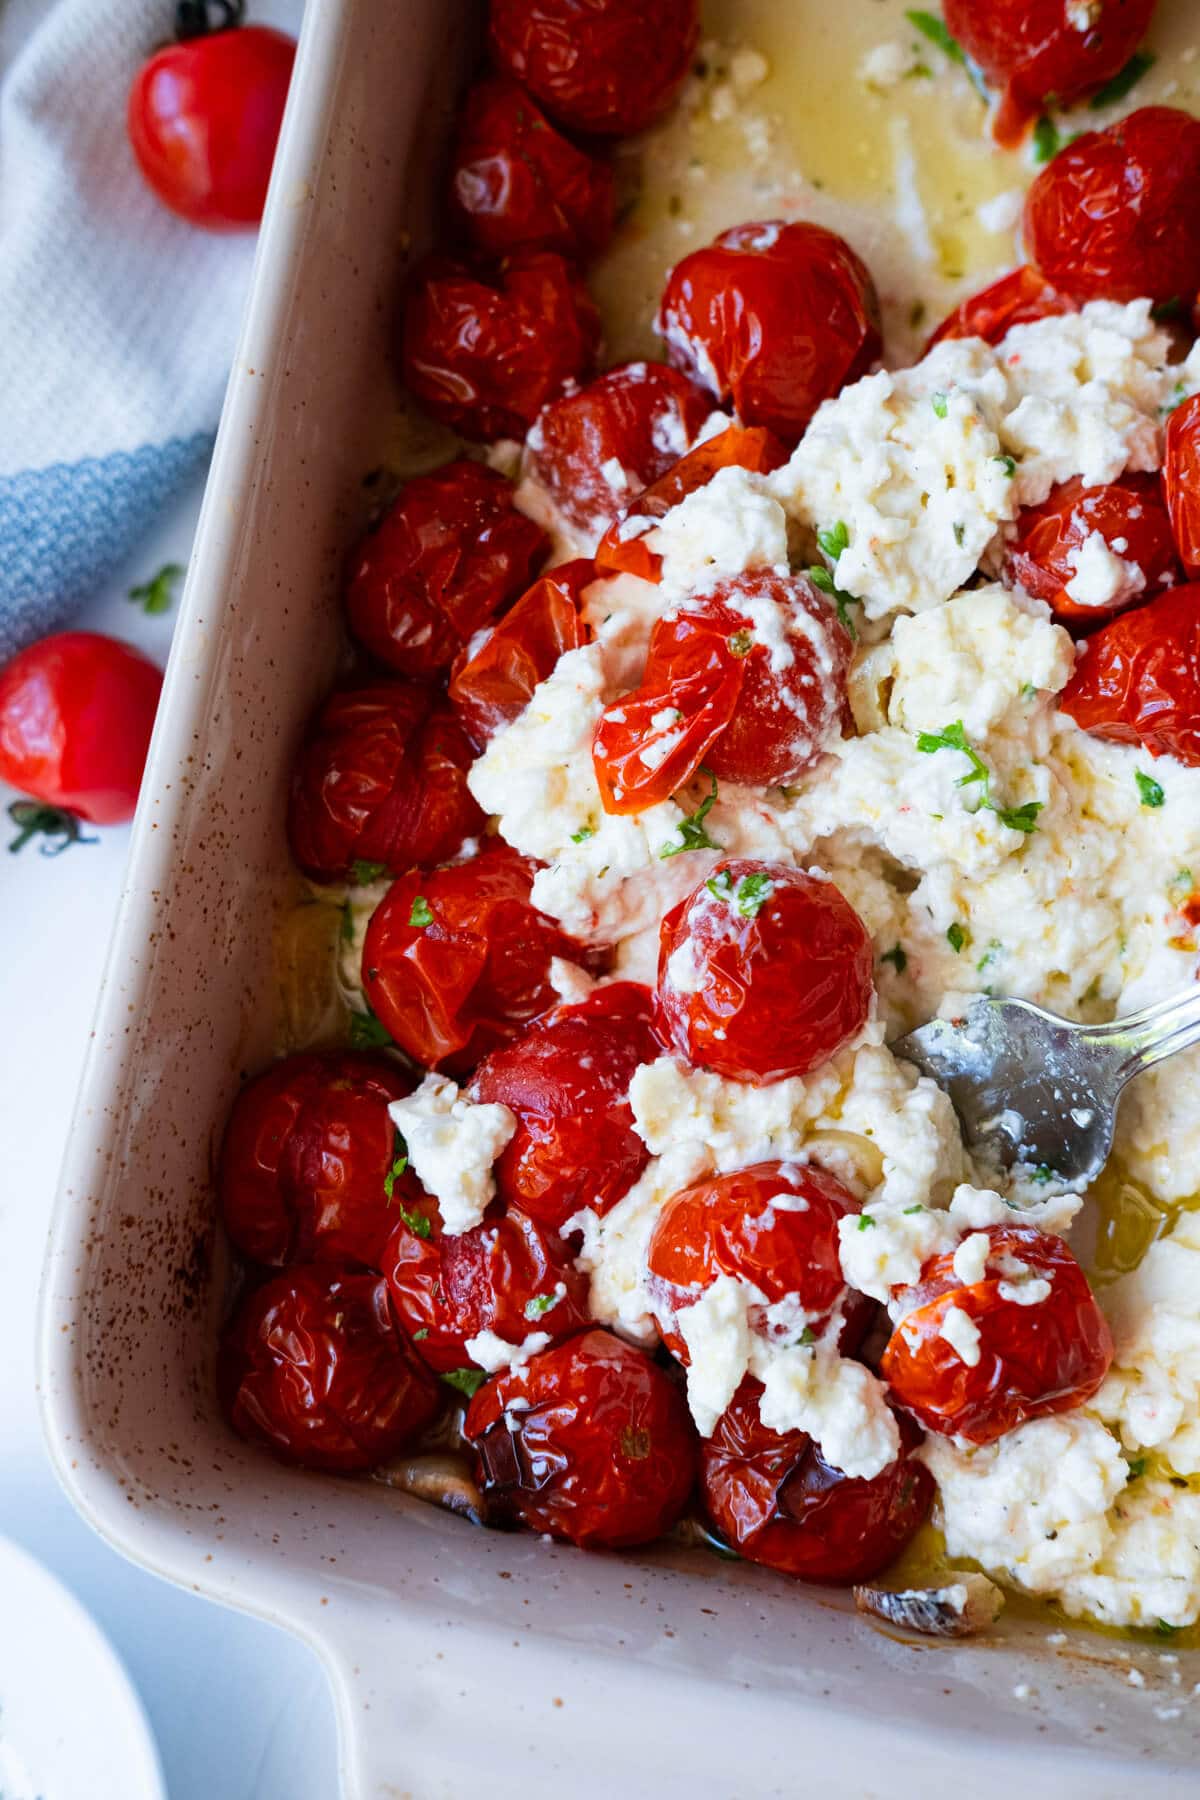 Break the feta cheese and stir it well with tomatoes. 